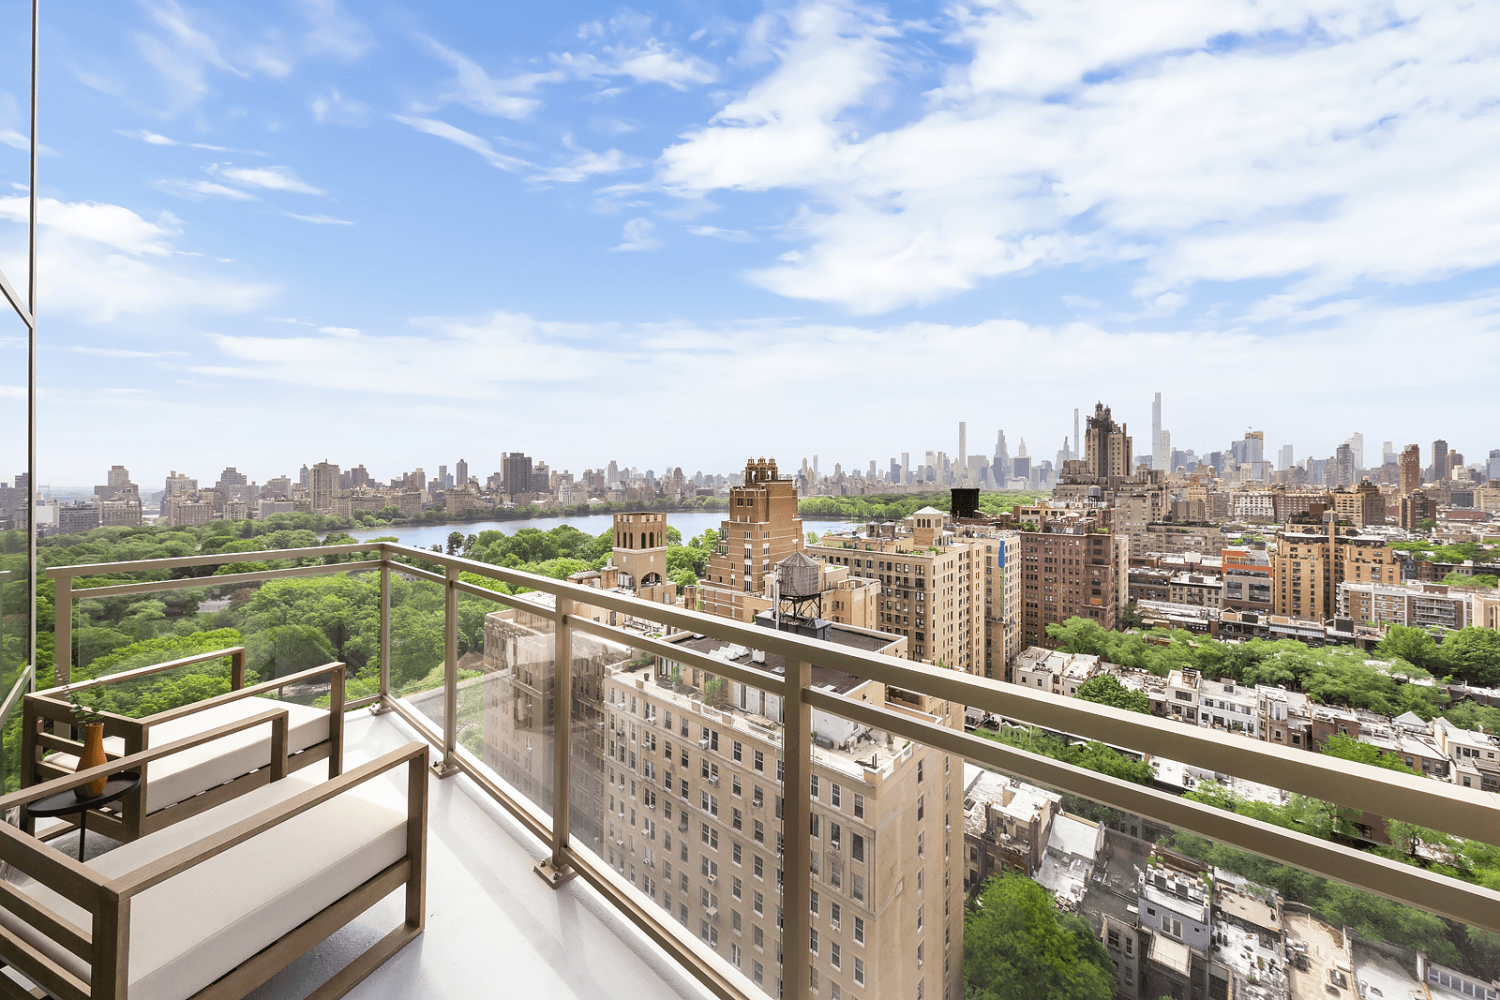 Your Upper West Side Story Begins Here at Fifteen Off The ParkWelcome to this lavish full floor condo with private outdoor space, a sun drenched 3 bedroom, 3 bathroom home ...